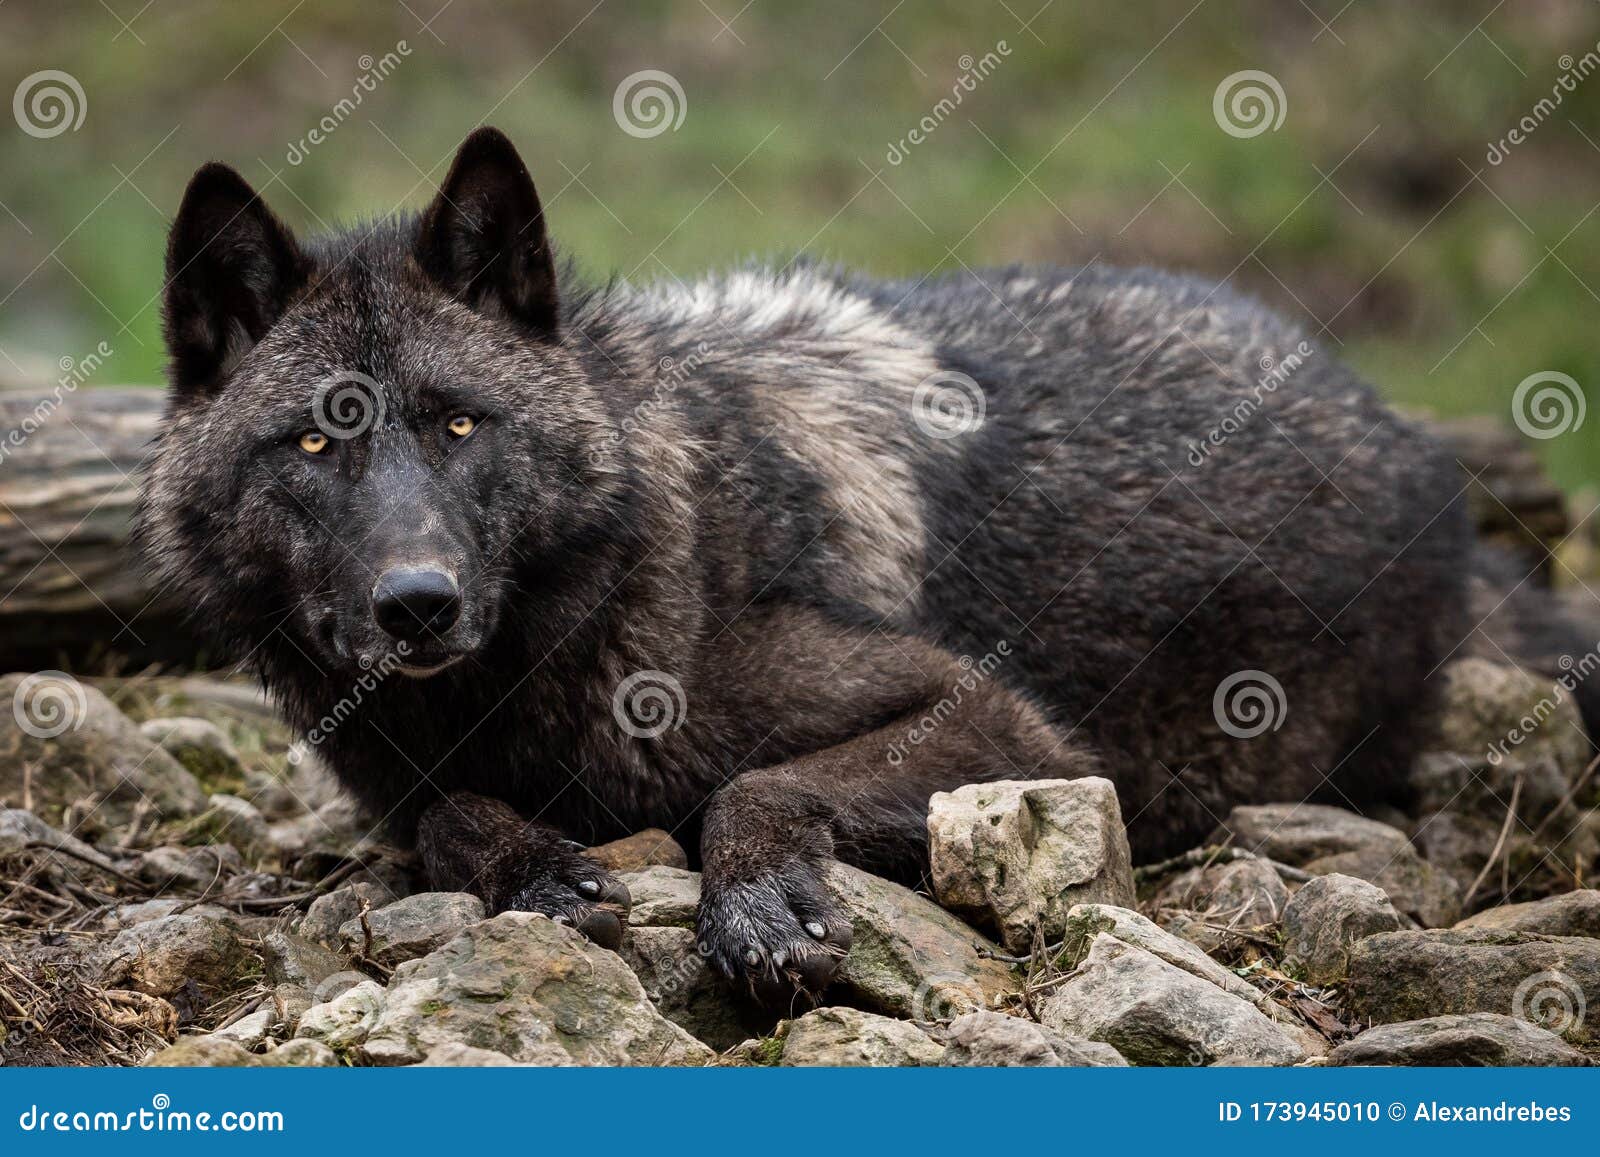 timberwolf in the forest